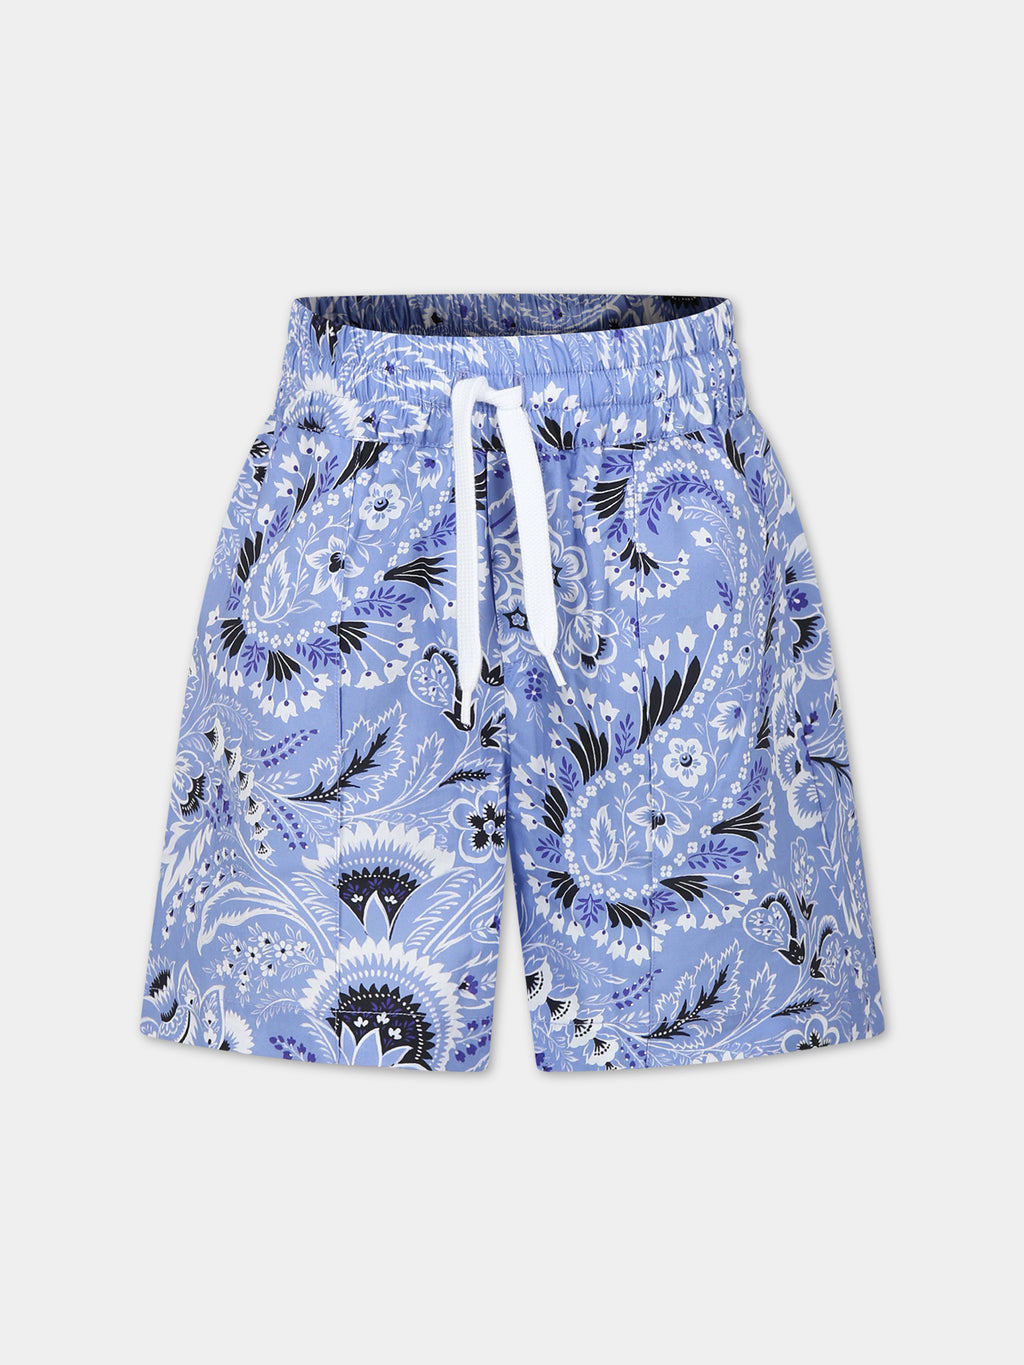 Sky blue casual shorts for boy with paisley pattern